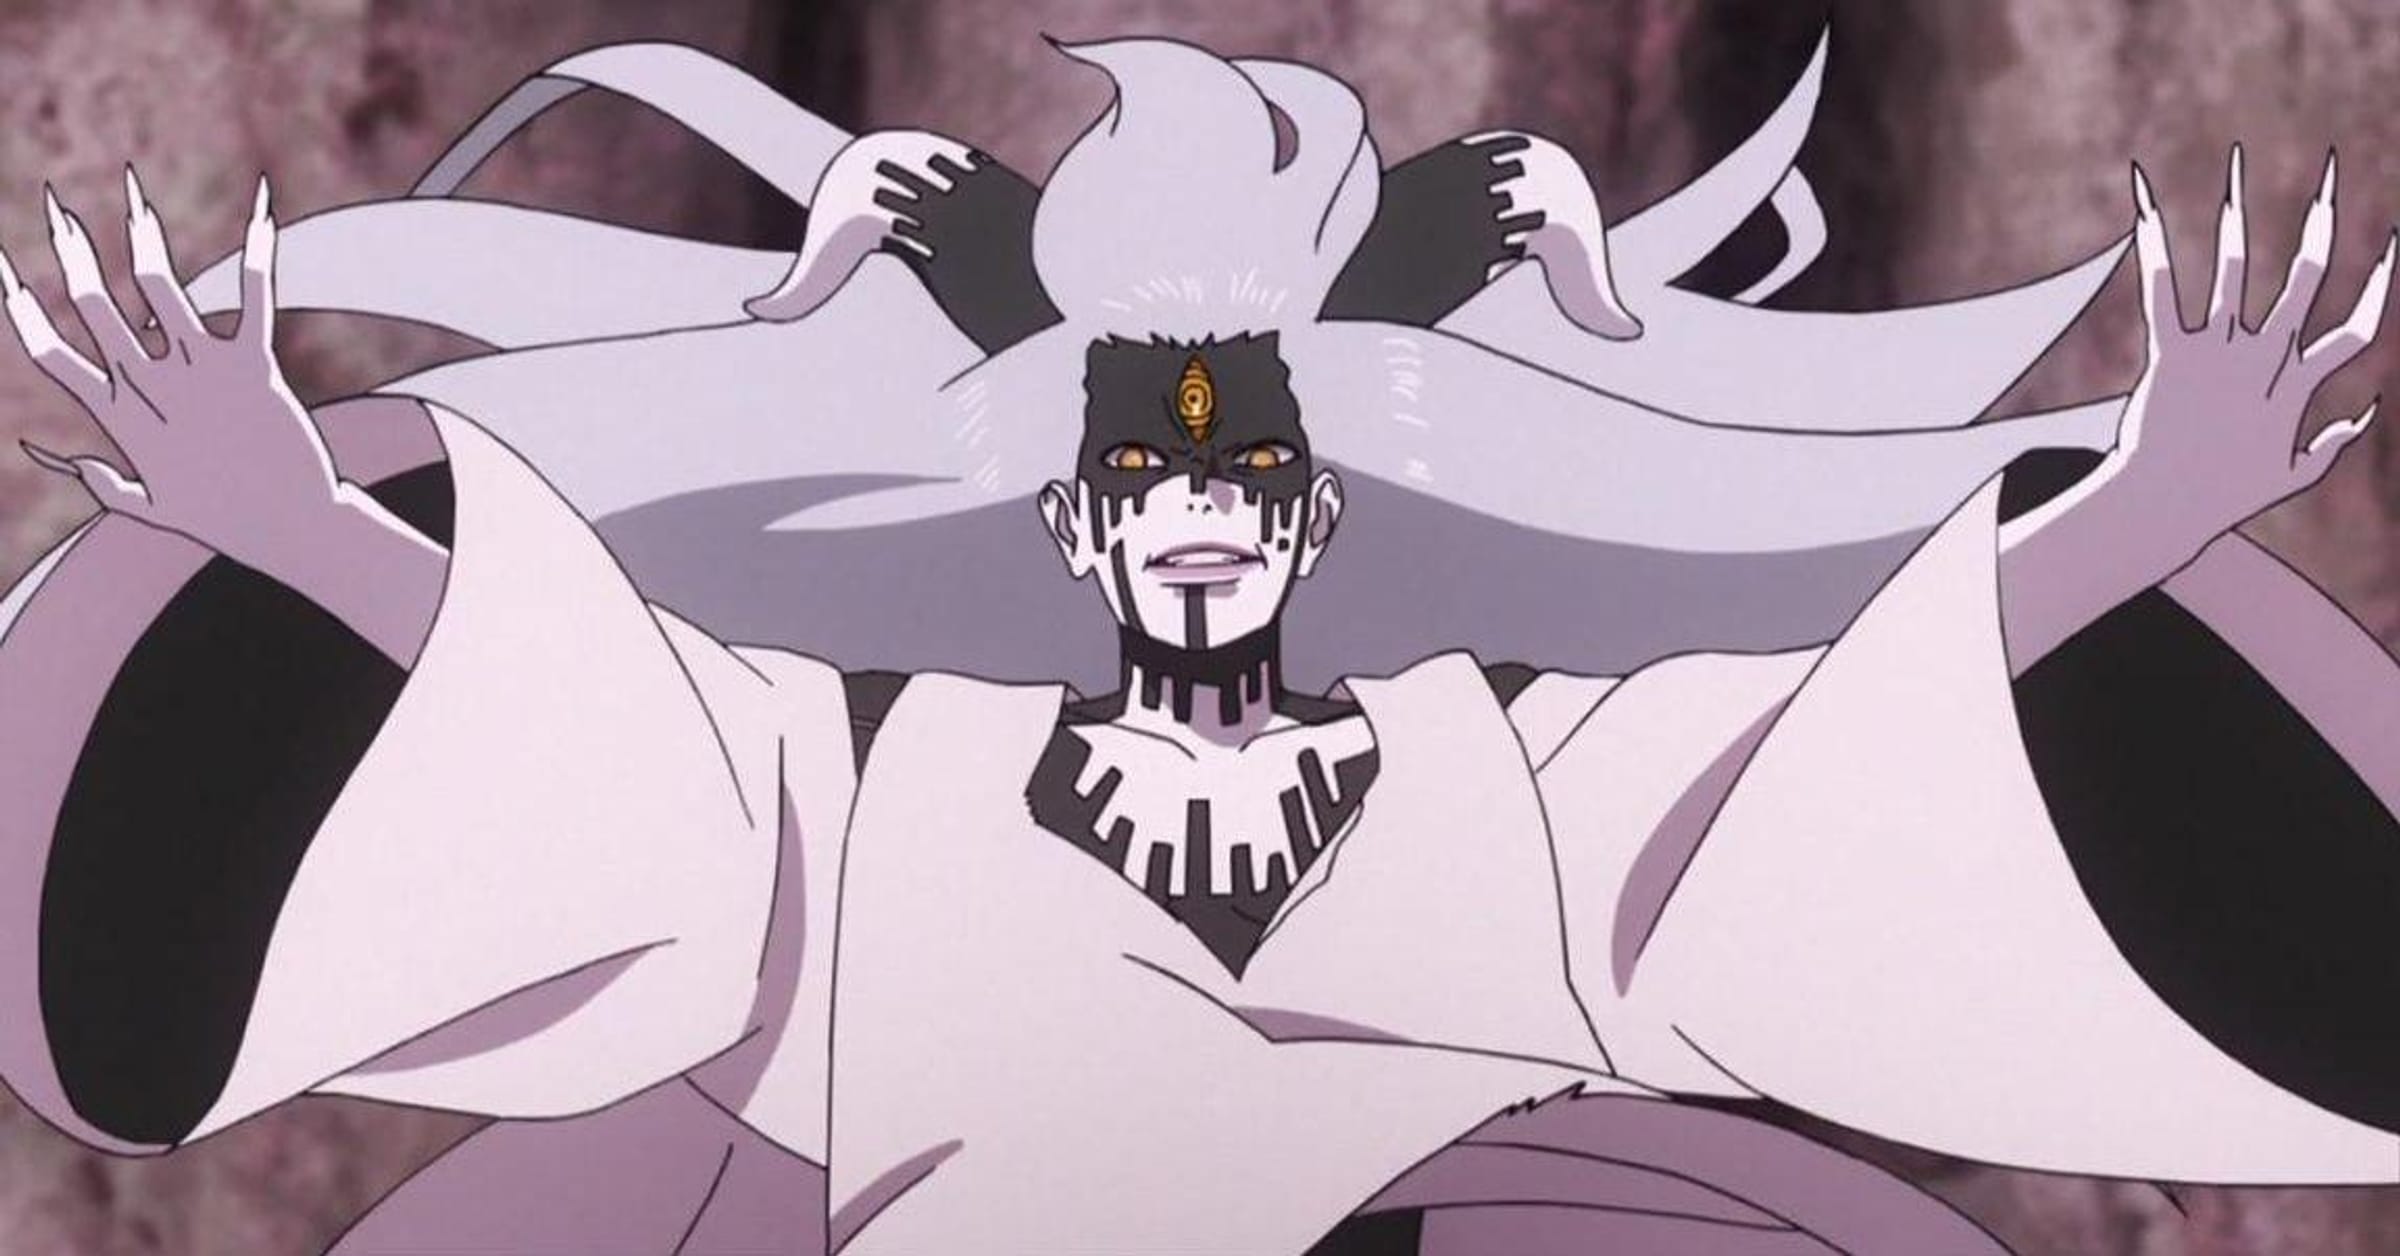 Boruto's Anime Just Made One Villain So Much Scarier Than the Manga